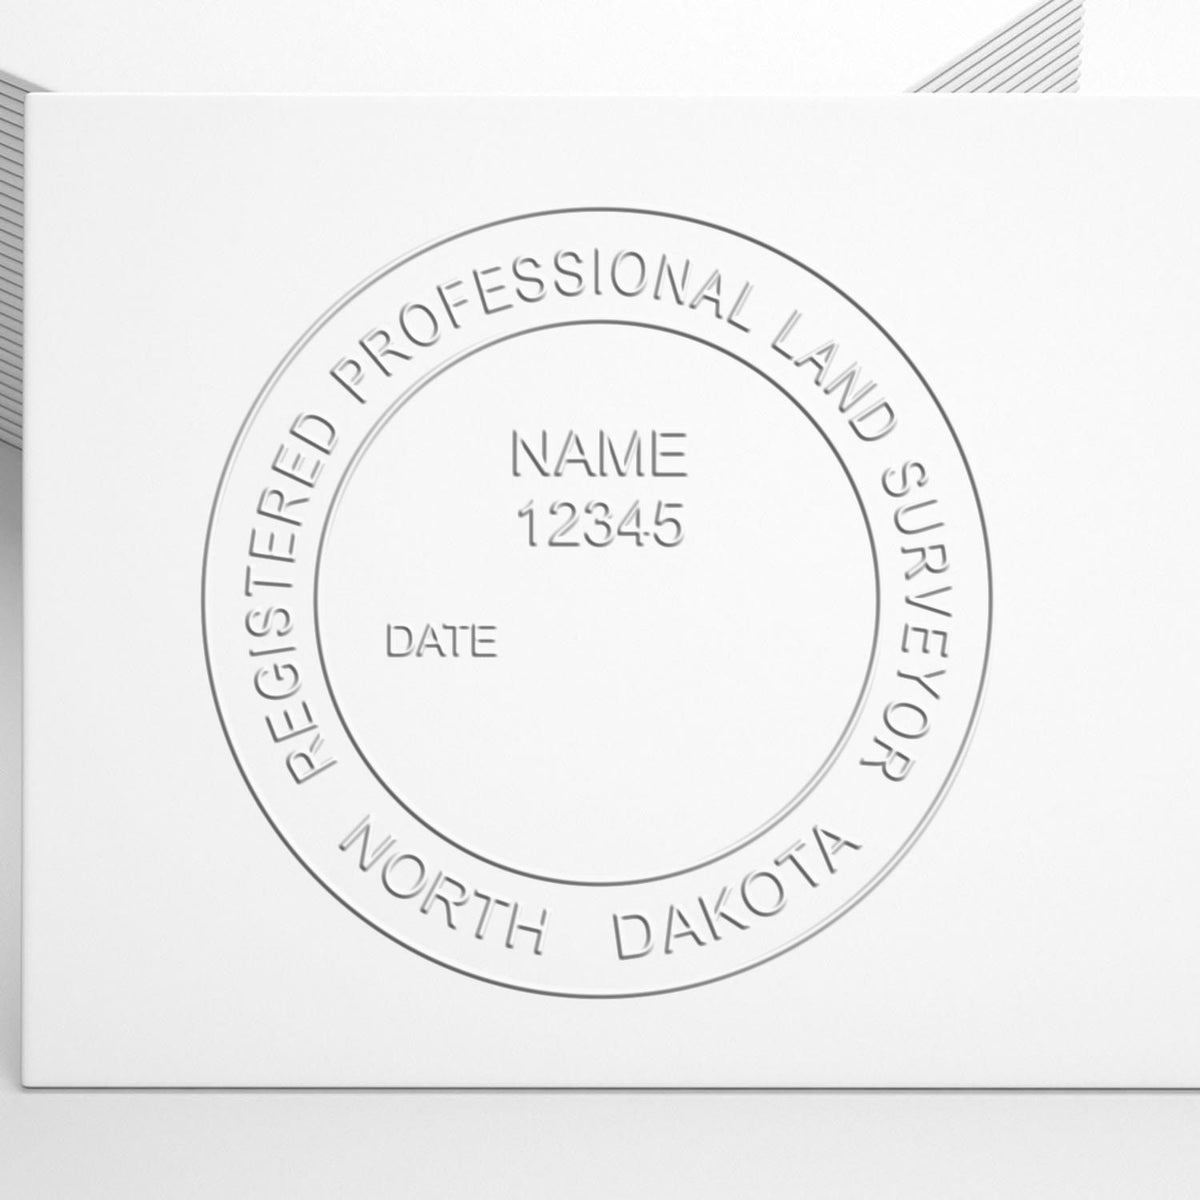 An in use photo of the Hybrid North Dakota Land Surveyor Seal showing a sample imprint on a cardstock